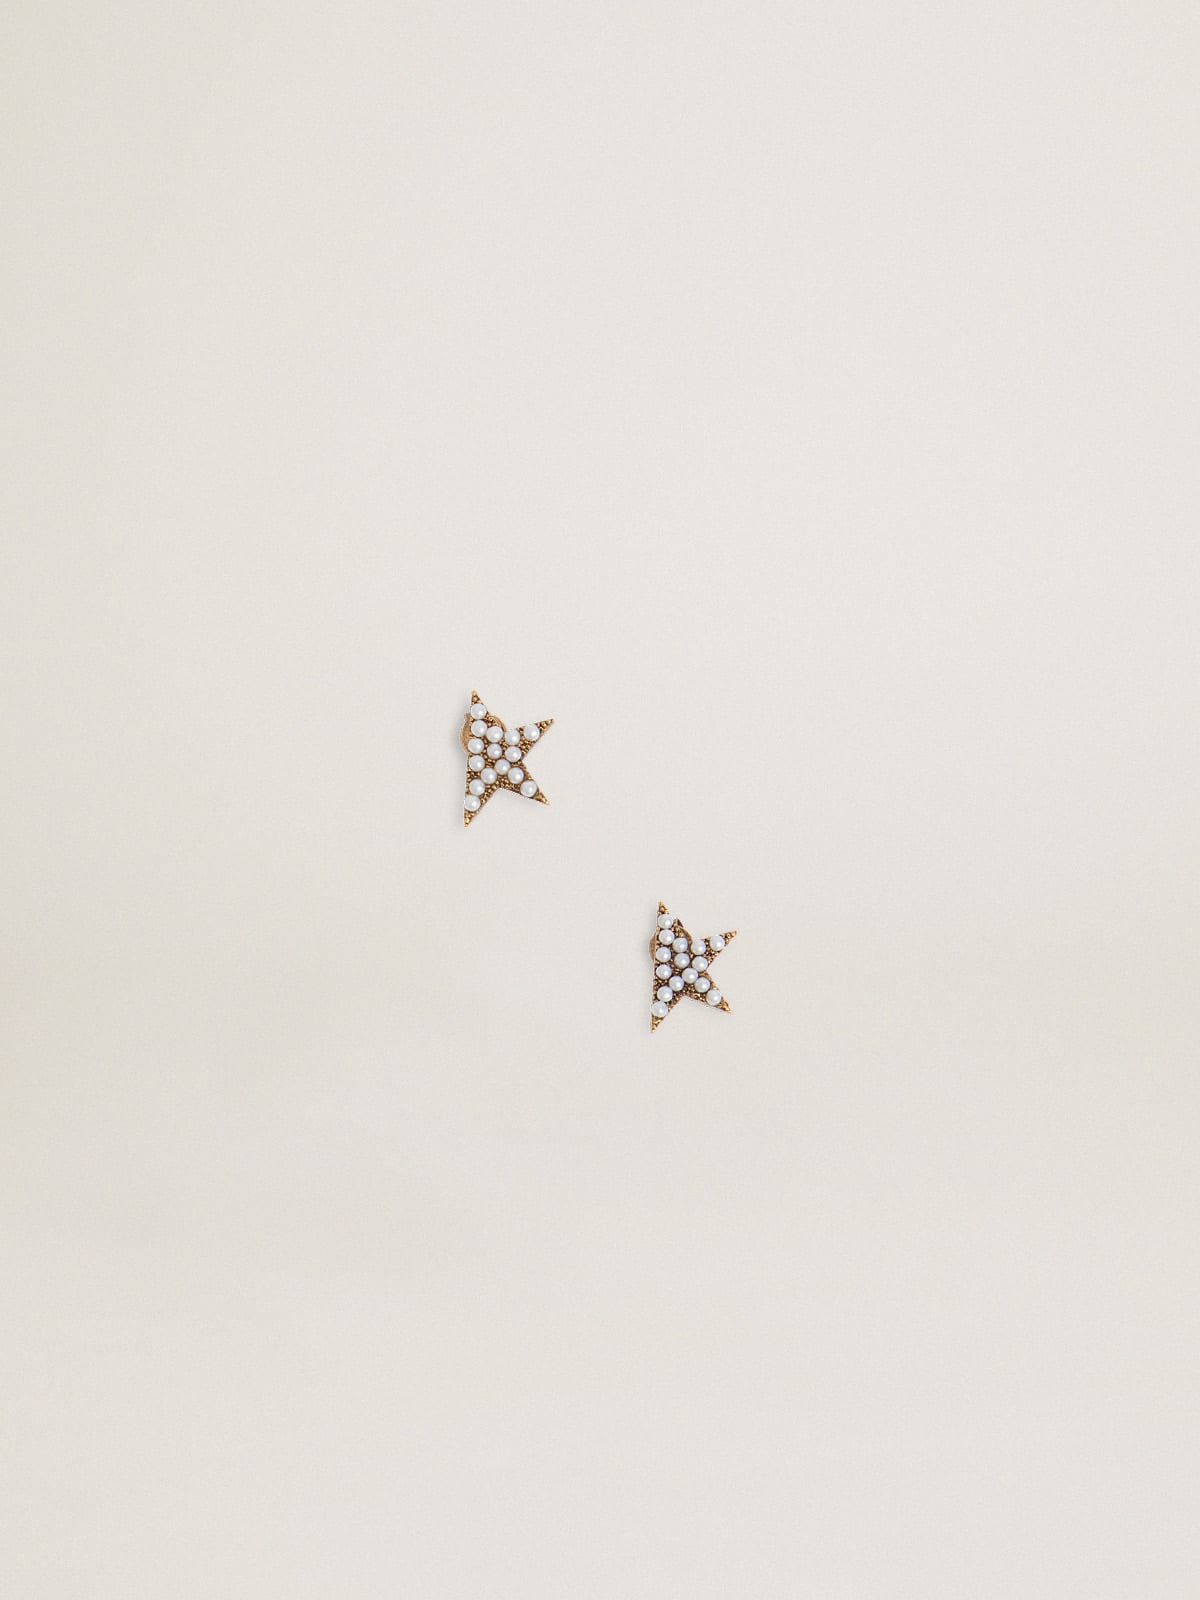 Golden Goose - Star Jewelmates Collection stud earrings in old gold color with decorative beads in 